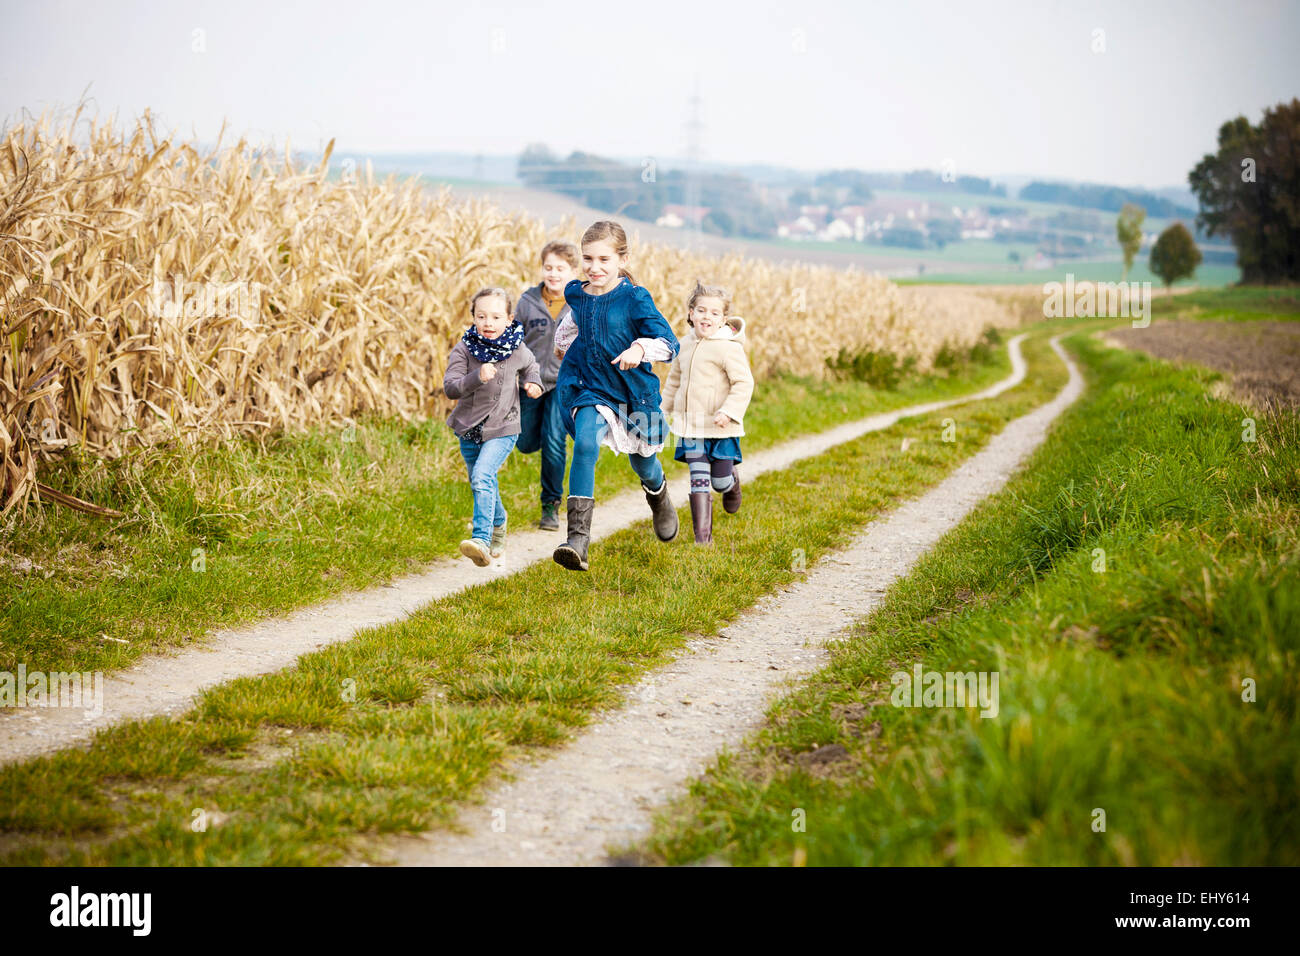 Four children playing outdoors Stock Photo